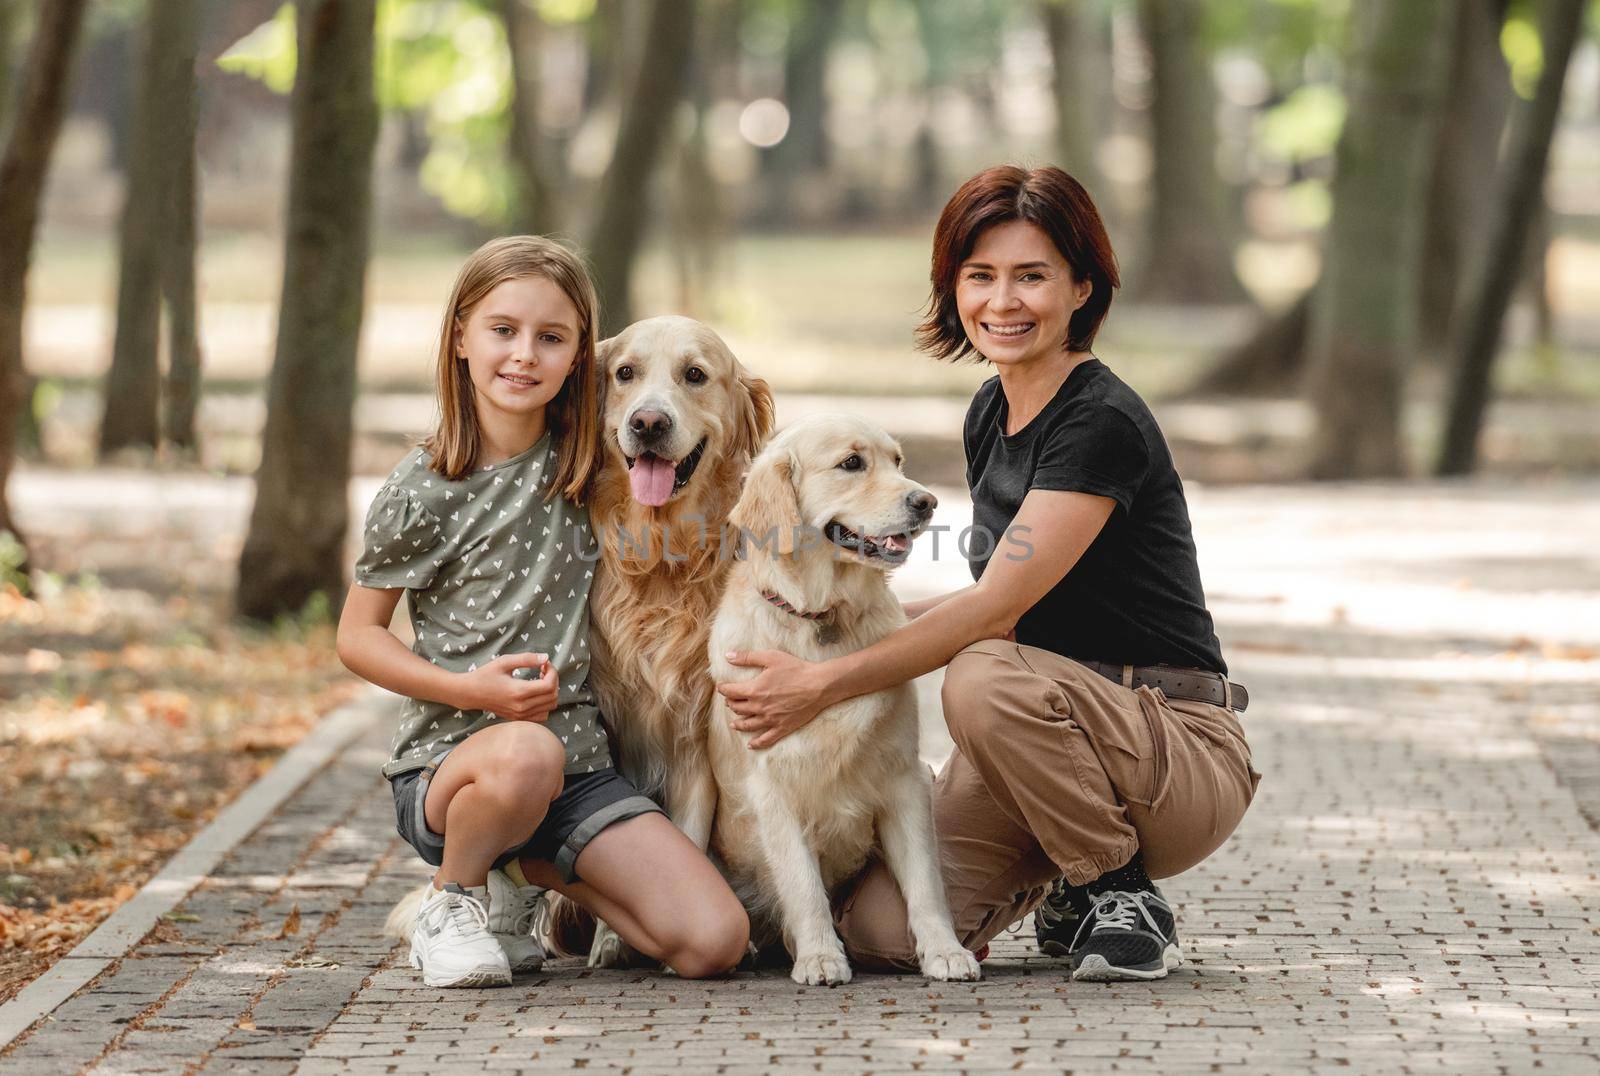 Mother and daughter with golden retriever dogs in the park. Family with pets doggies and preteen girl child outdoors